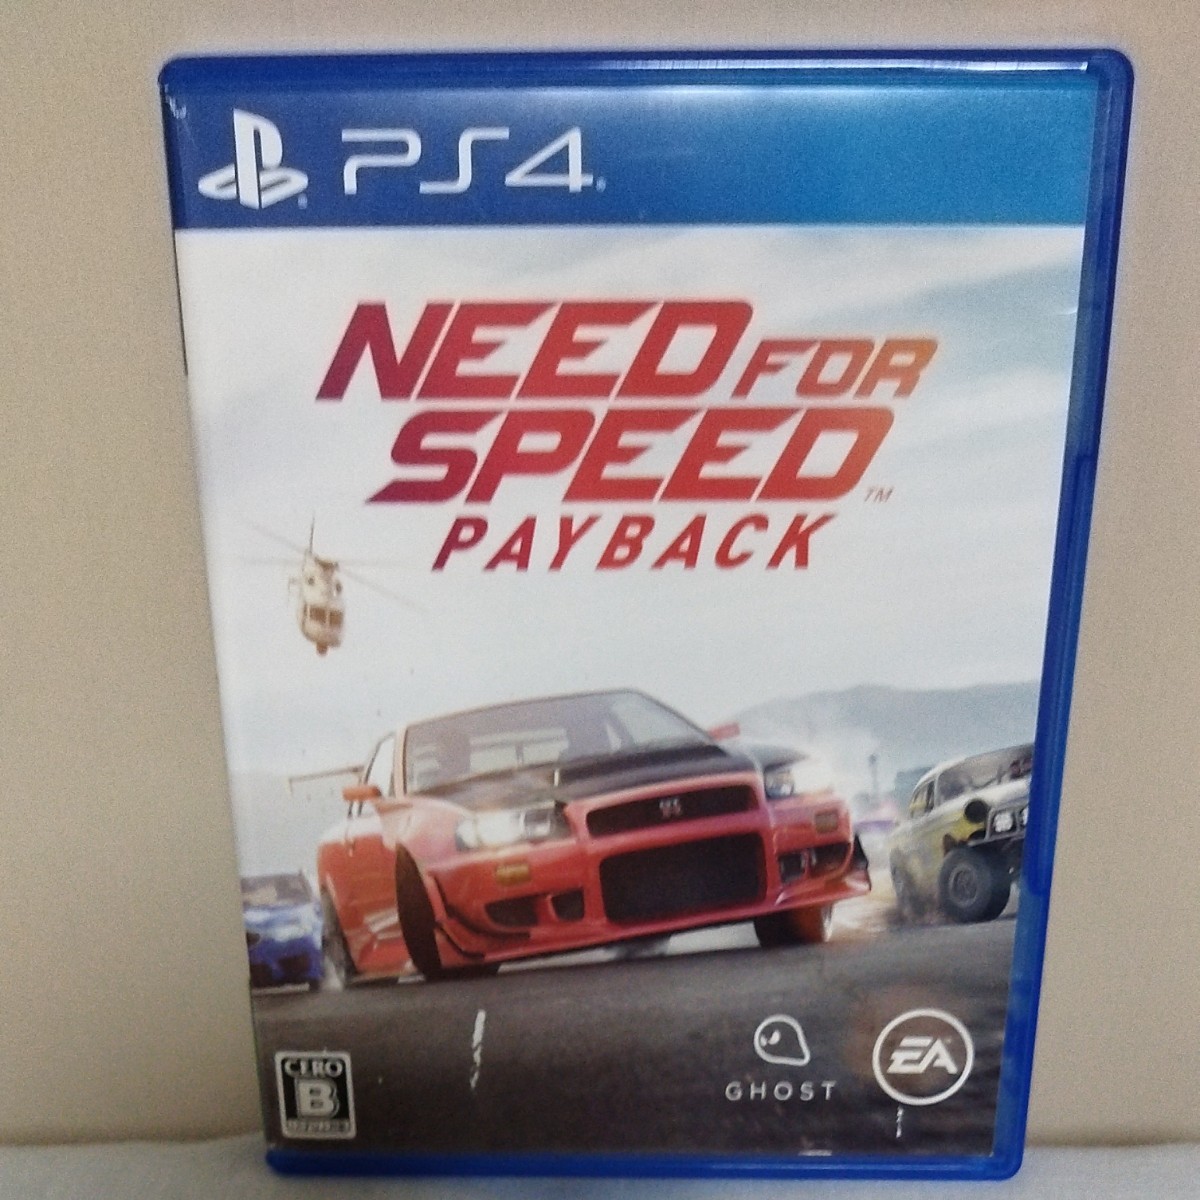 PS4　 NEED FOR SPEED PAYBACK　ジャケいたみ　ニード・フォー・スピード ペイバック